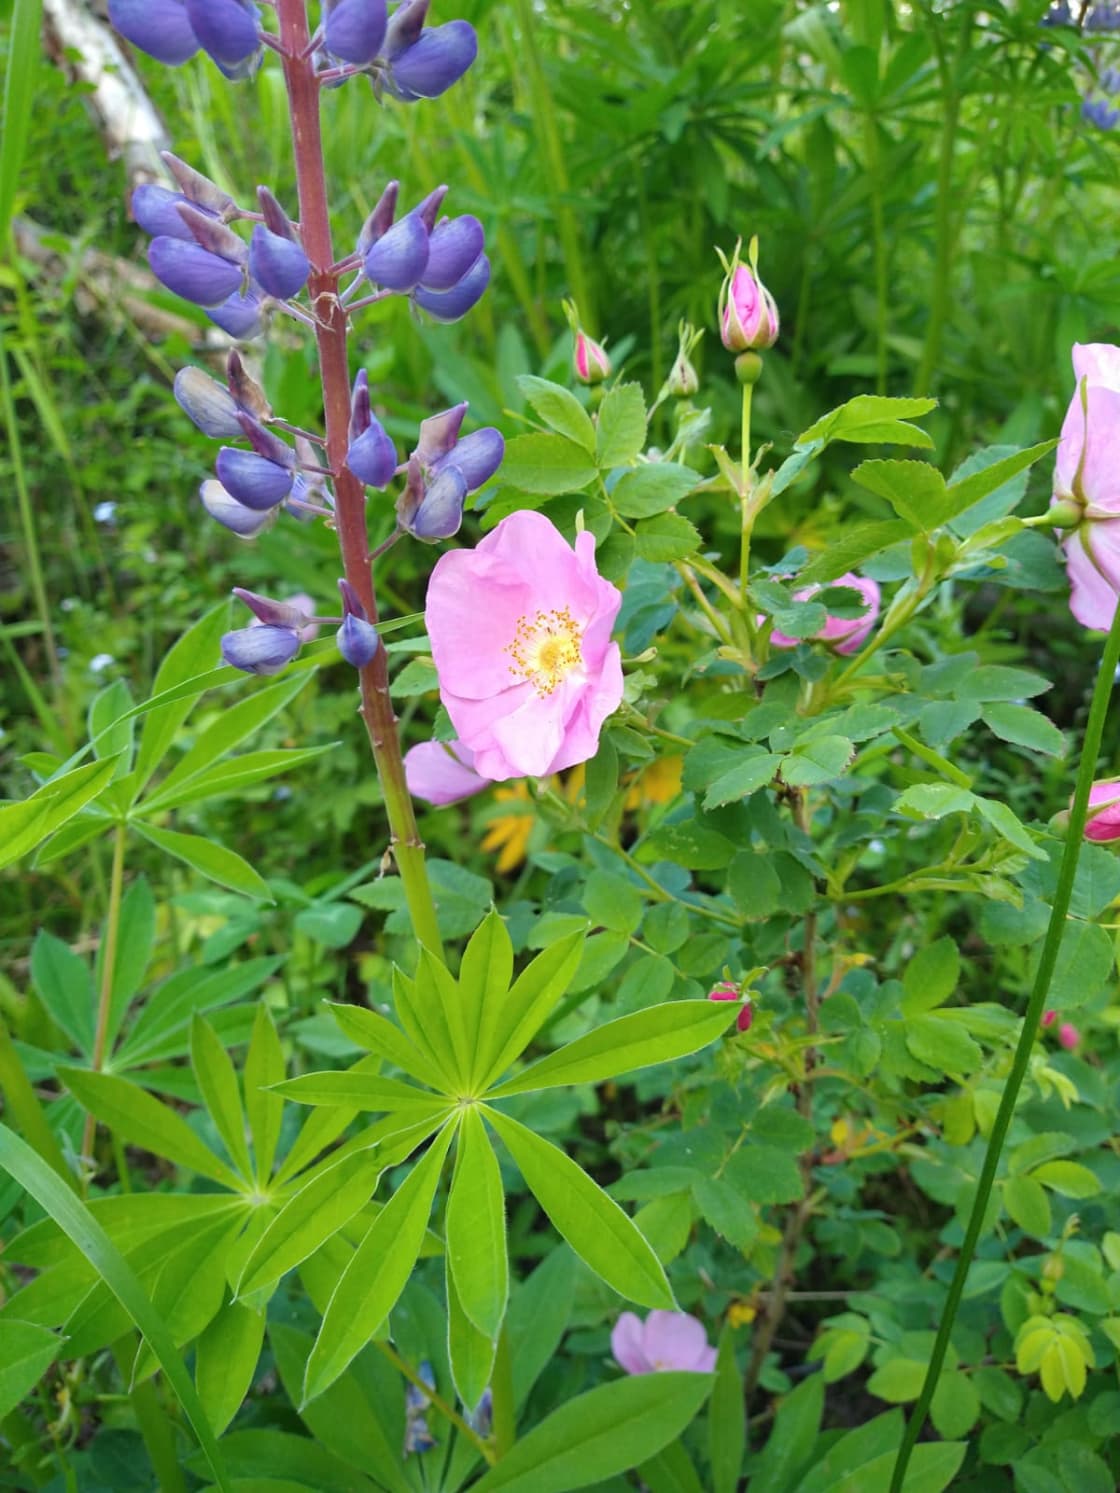 Wild Roses and Lupins  about a five minute walk.
